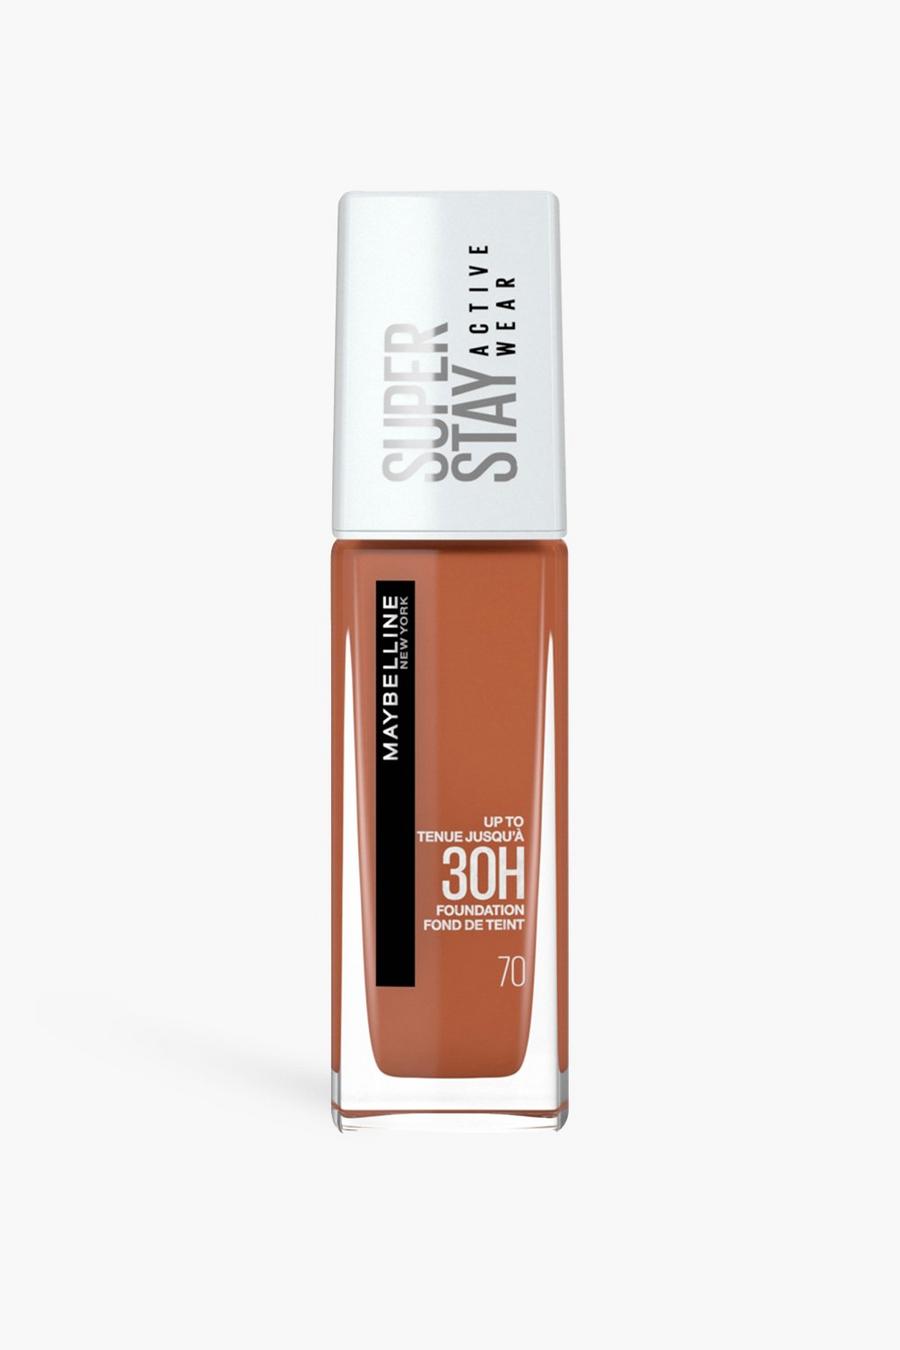 Maybelline - Fond de teint Superstay, 70 cocoa image number 1